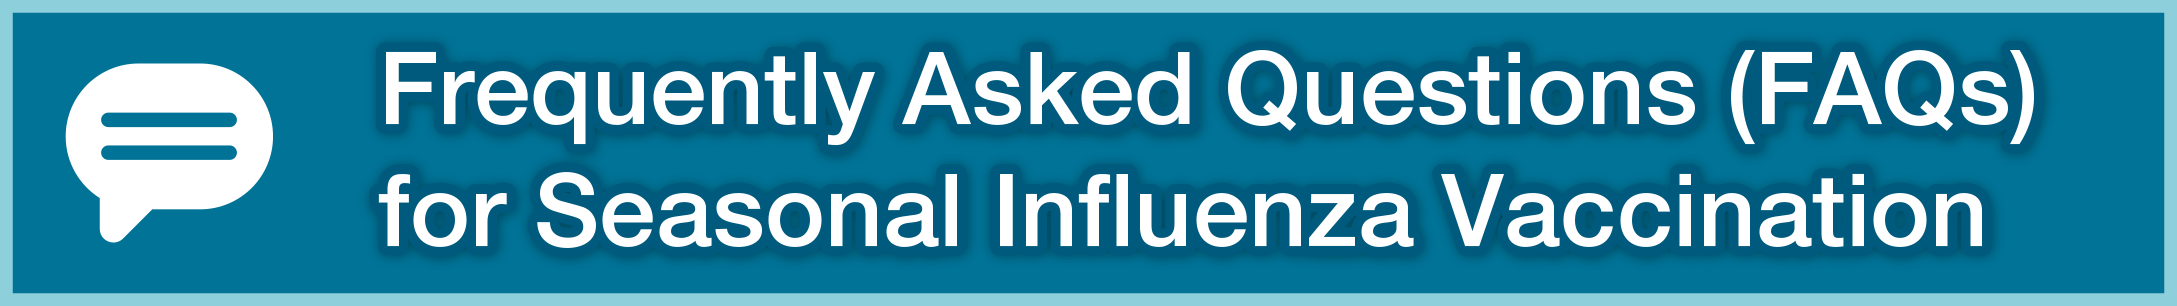 Frequently Asked Questions (FAQs) for Seasonal Influenza Vaccination